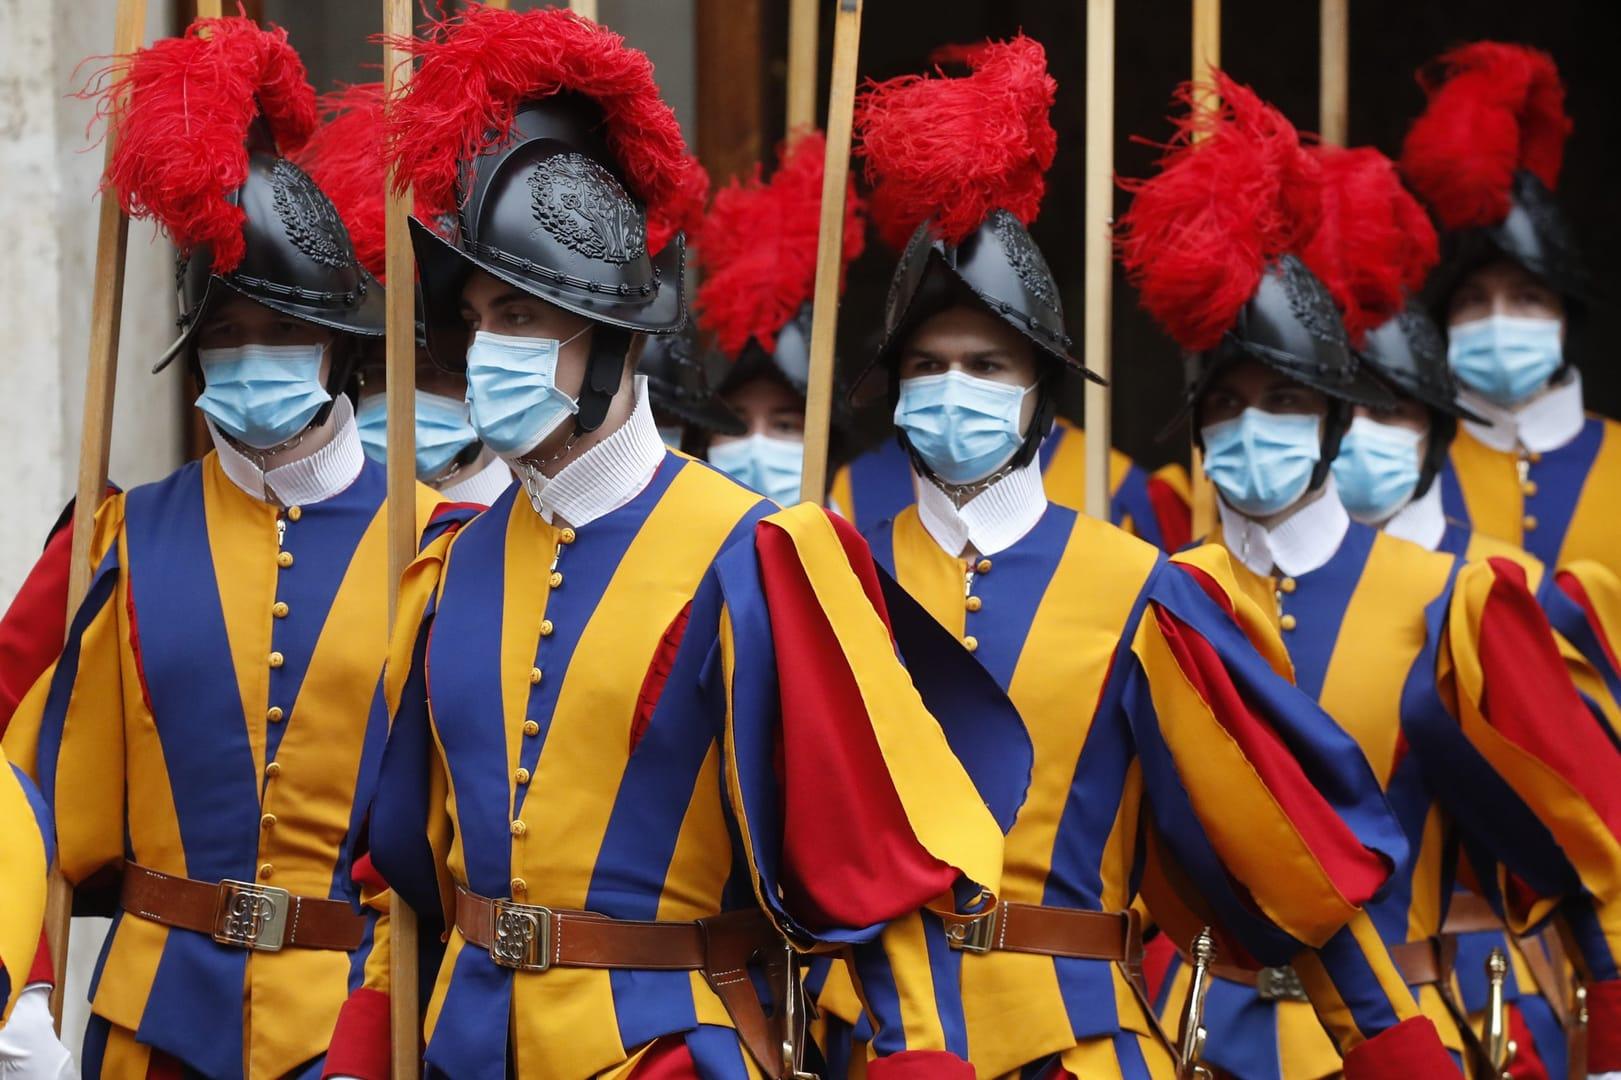 Three Swiss Guards quit over refusal to take COVID vaccine